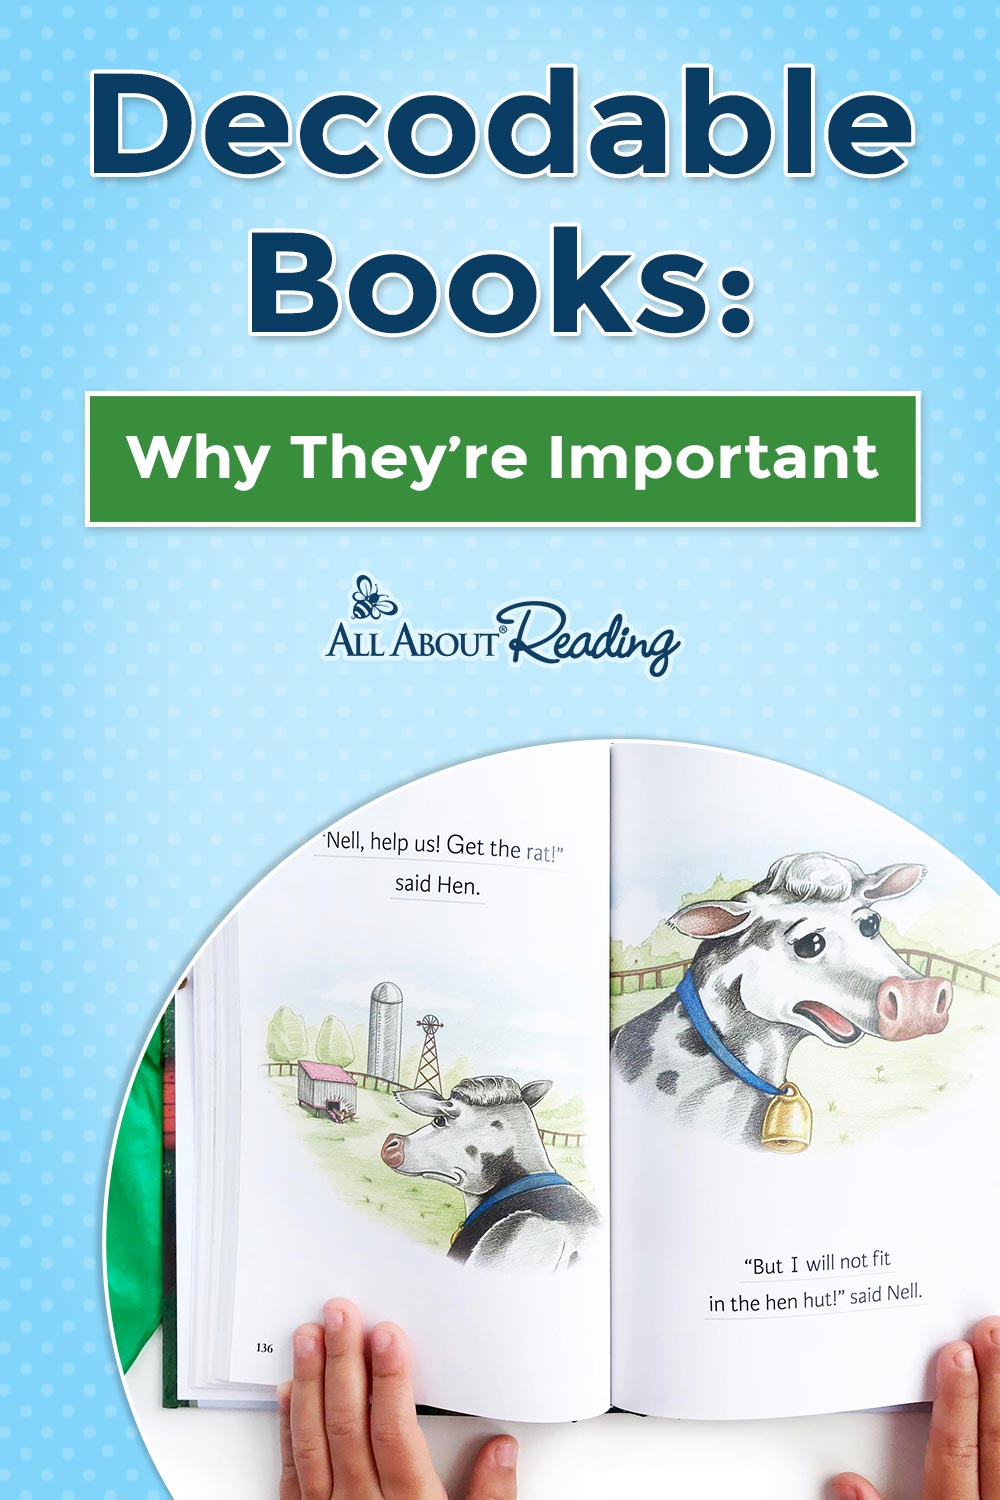 decodable-books-why-they-re-important-free-story-samples